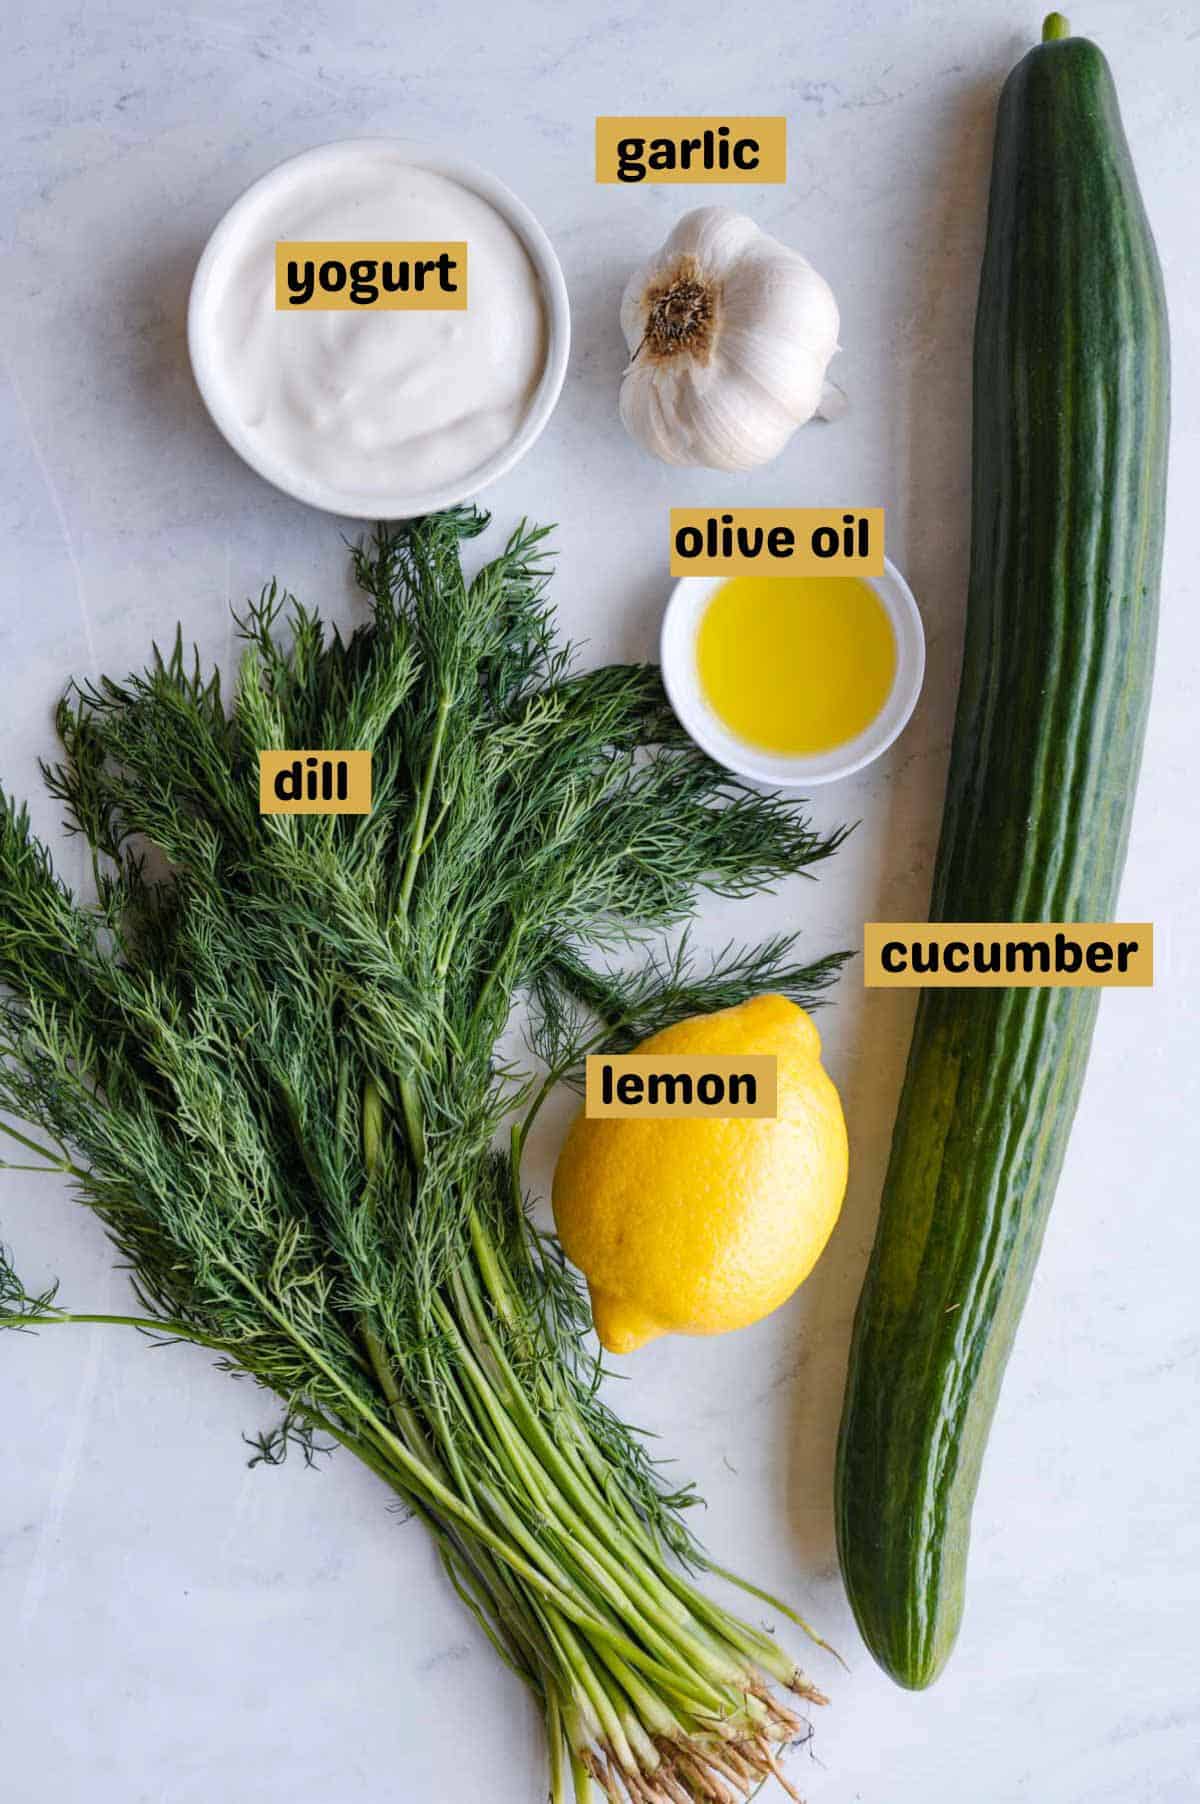 One cucumber, a bunch of dill, one lemon, a head of garlic, yogurt, and olive oil on a gray backdrop.